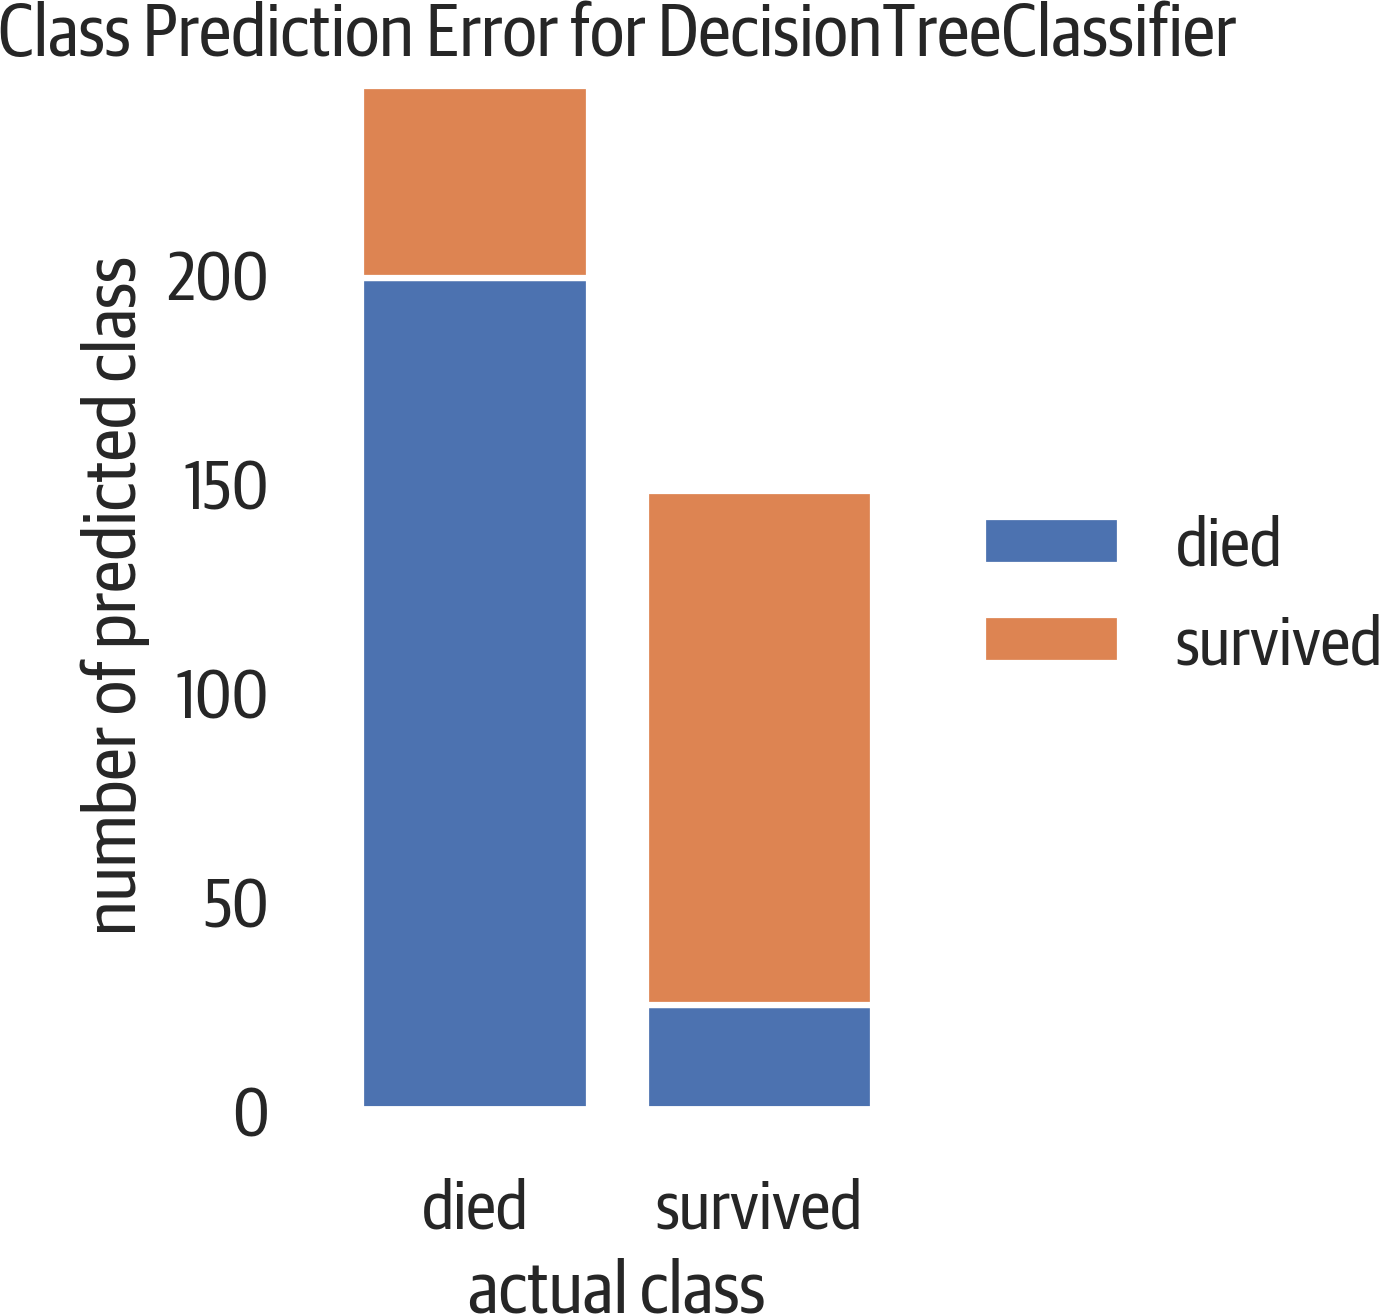 Class prediction error. At the top of the left bar are people who died, but we predicted that they survived (false positive). At the bottom of the right bar are people who survived, but the model predicted death (false negative).